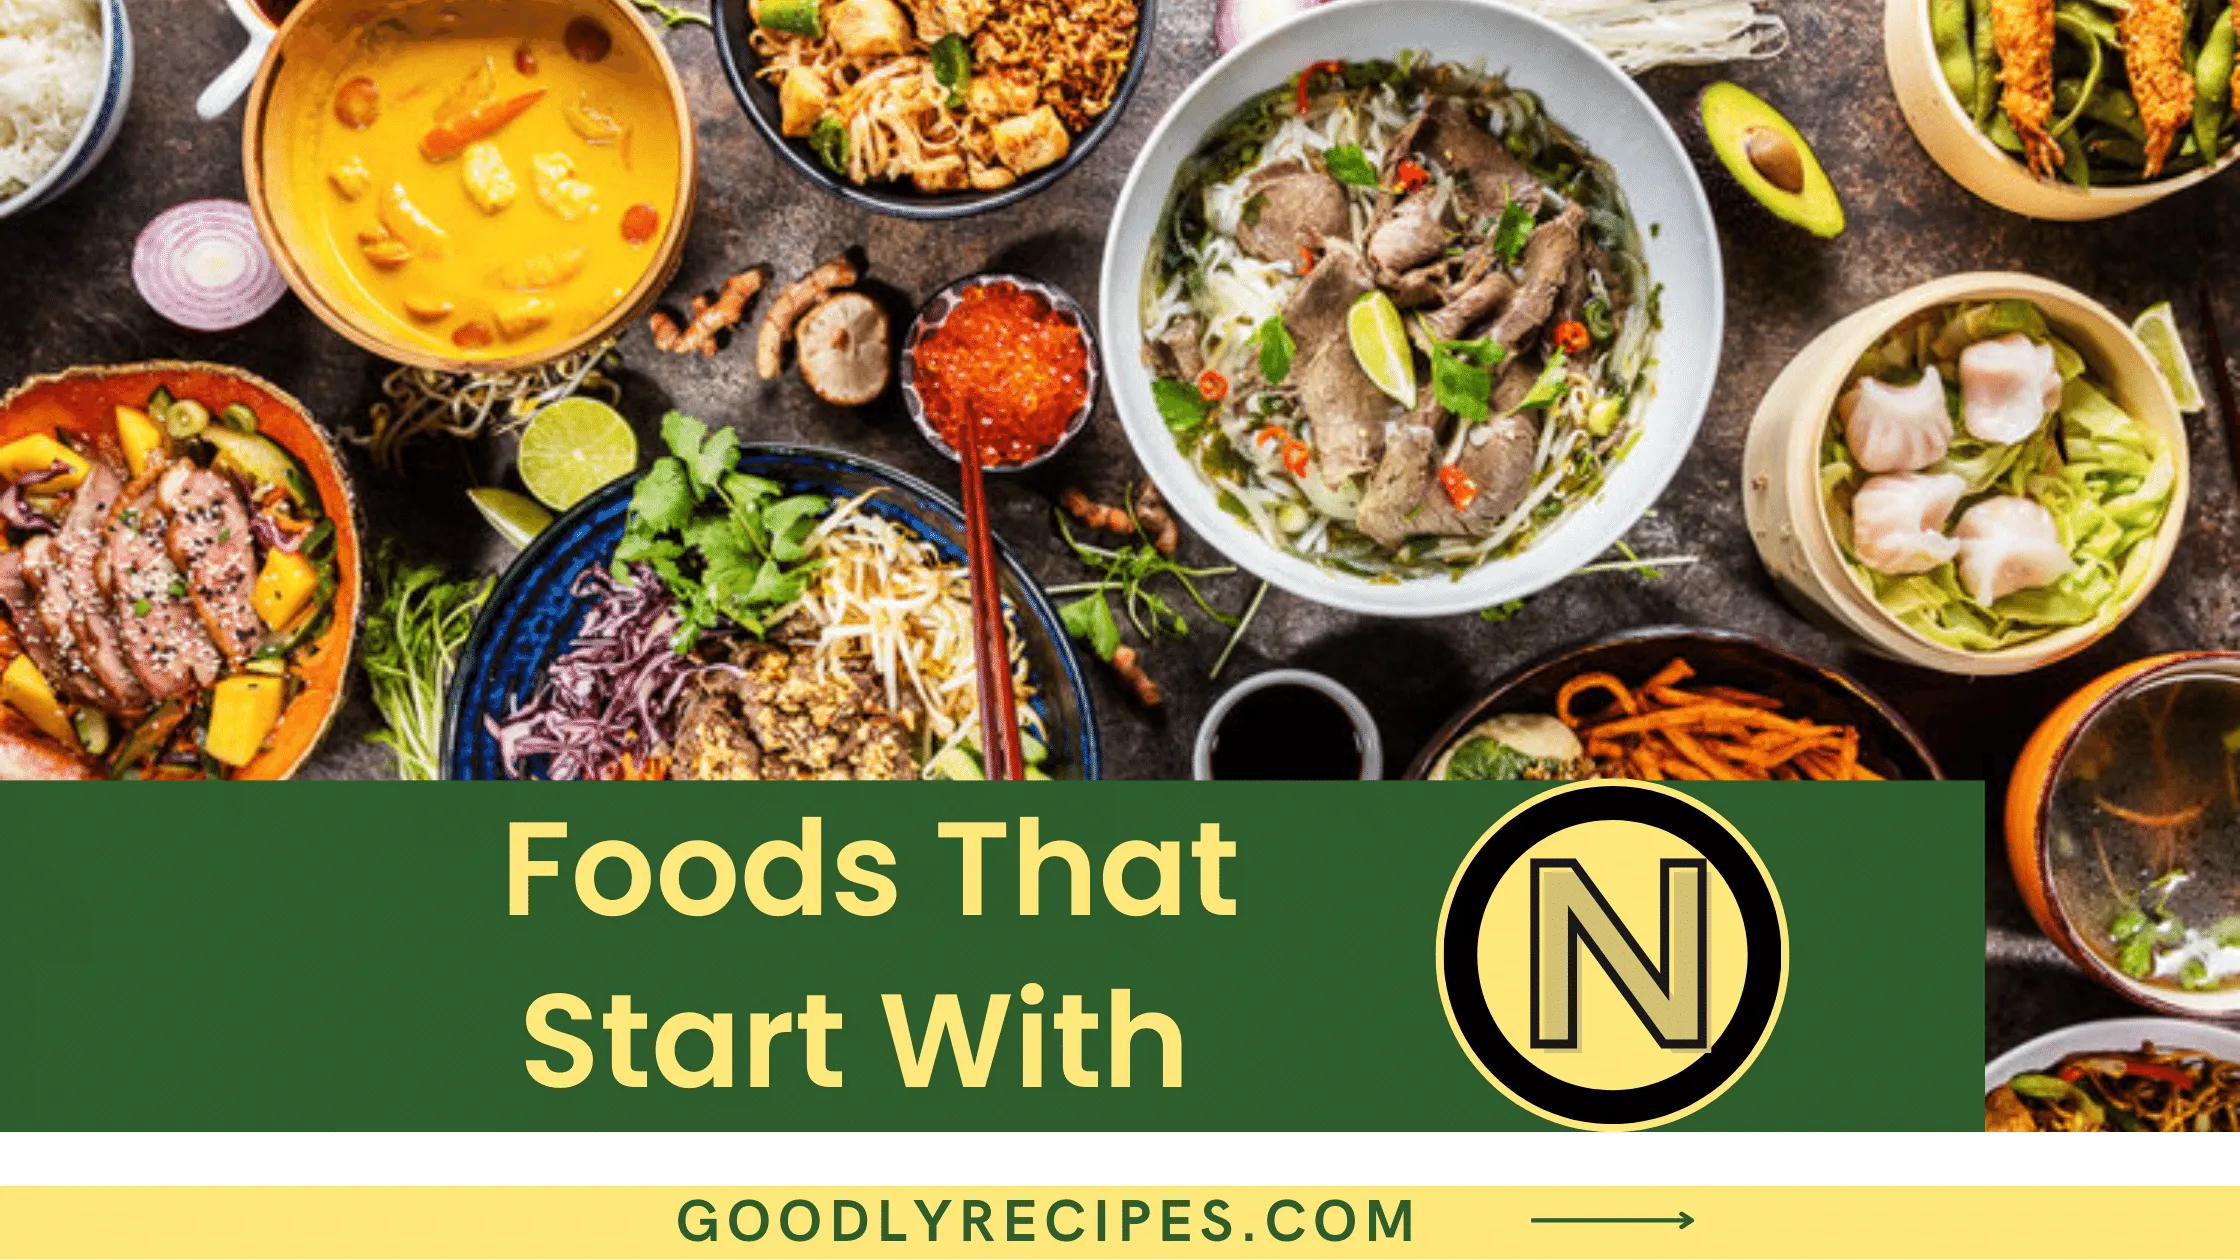 Foods That Start With N - Special Dishes